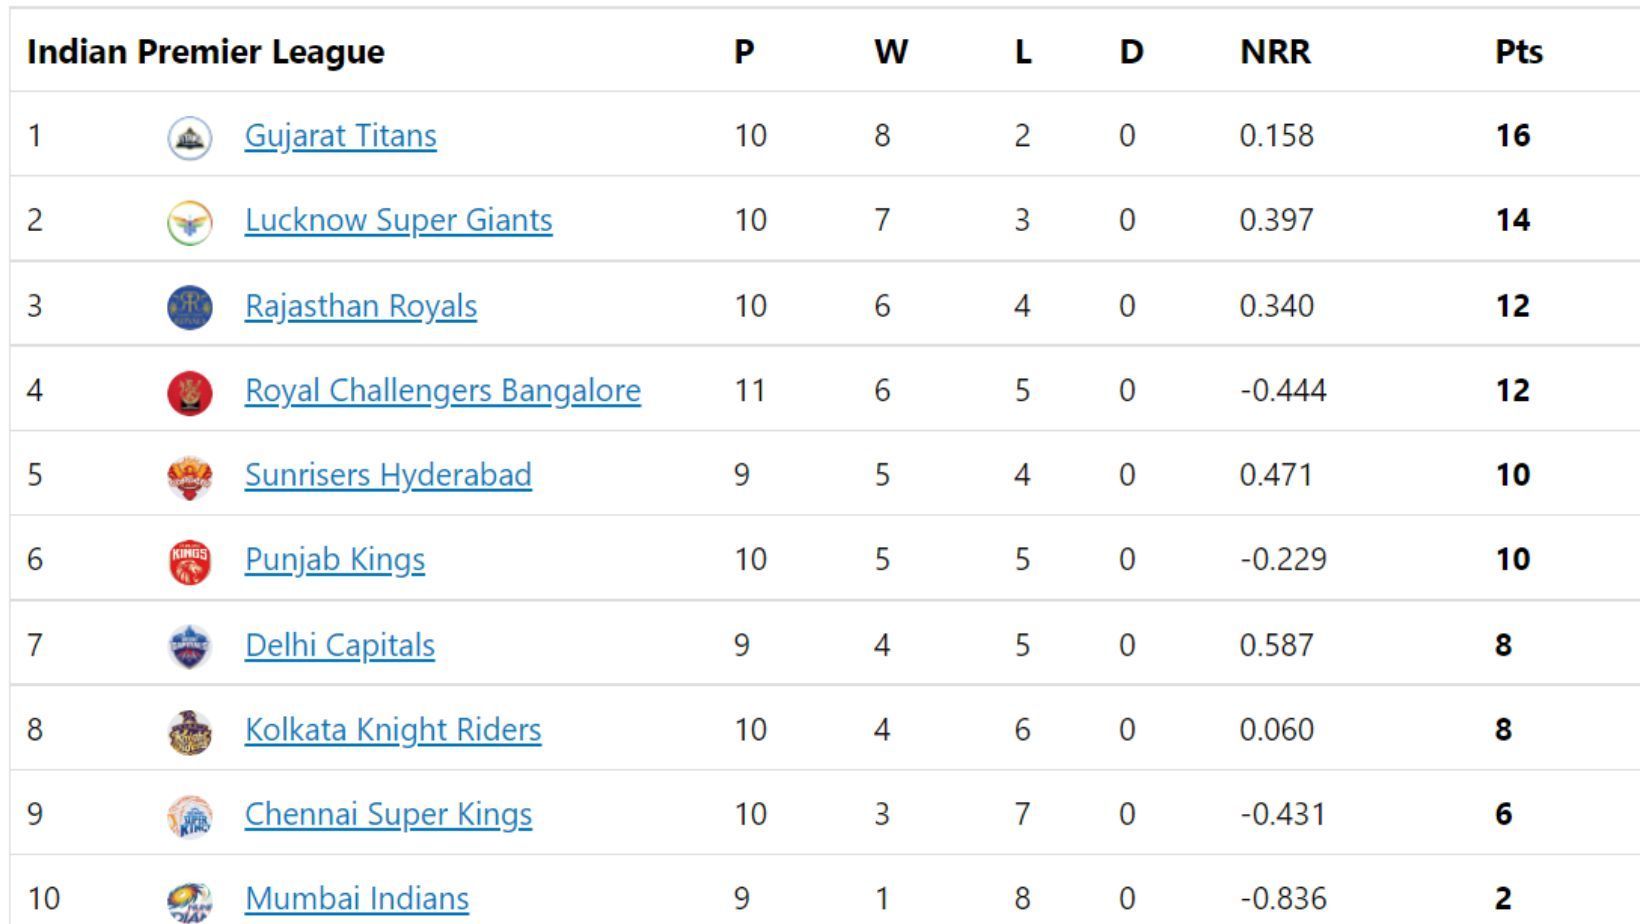 RCB jump two places in IPL 2022 points table.